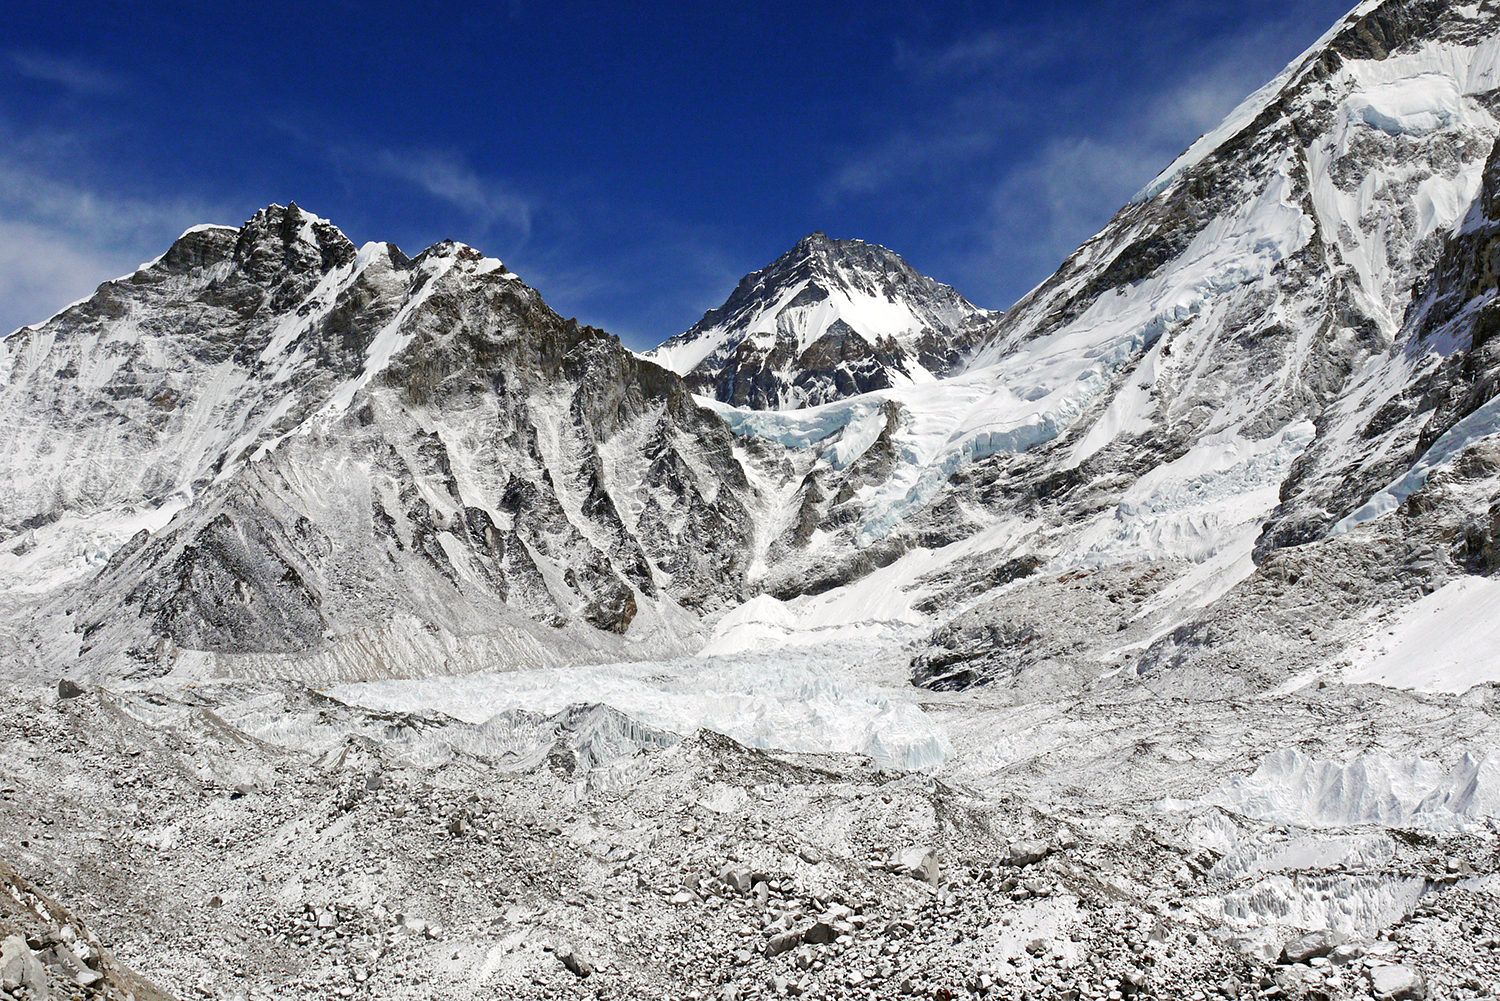 The final approach to Everest Base Camp - what a view!